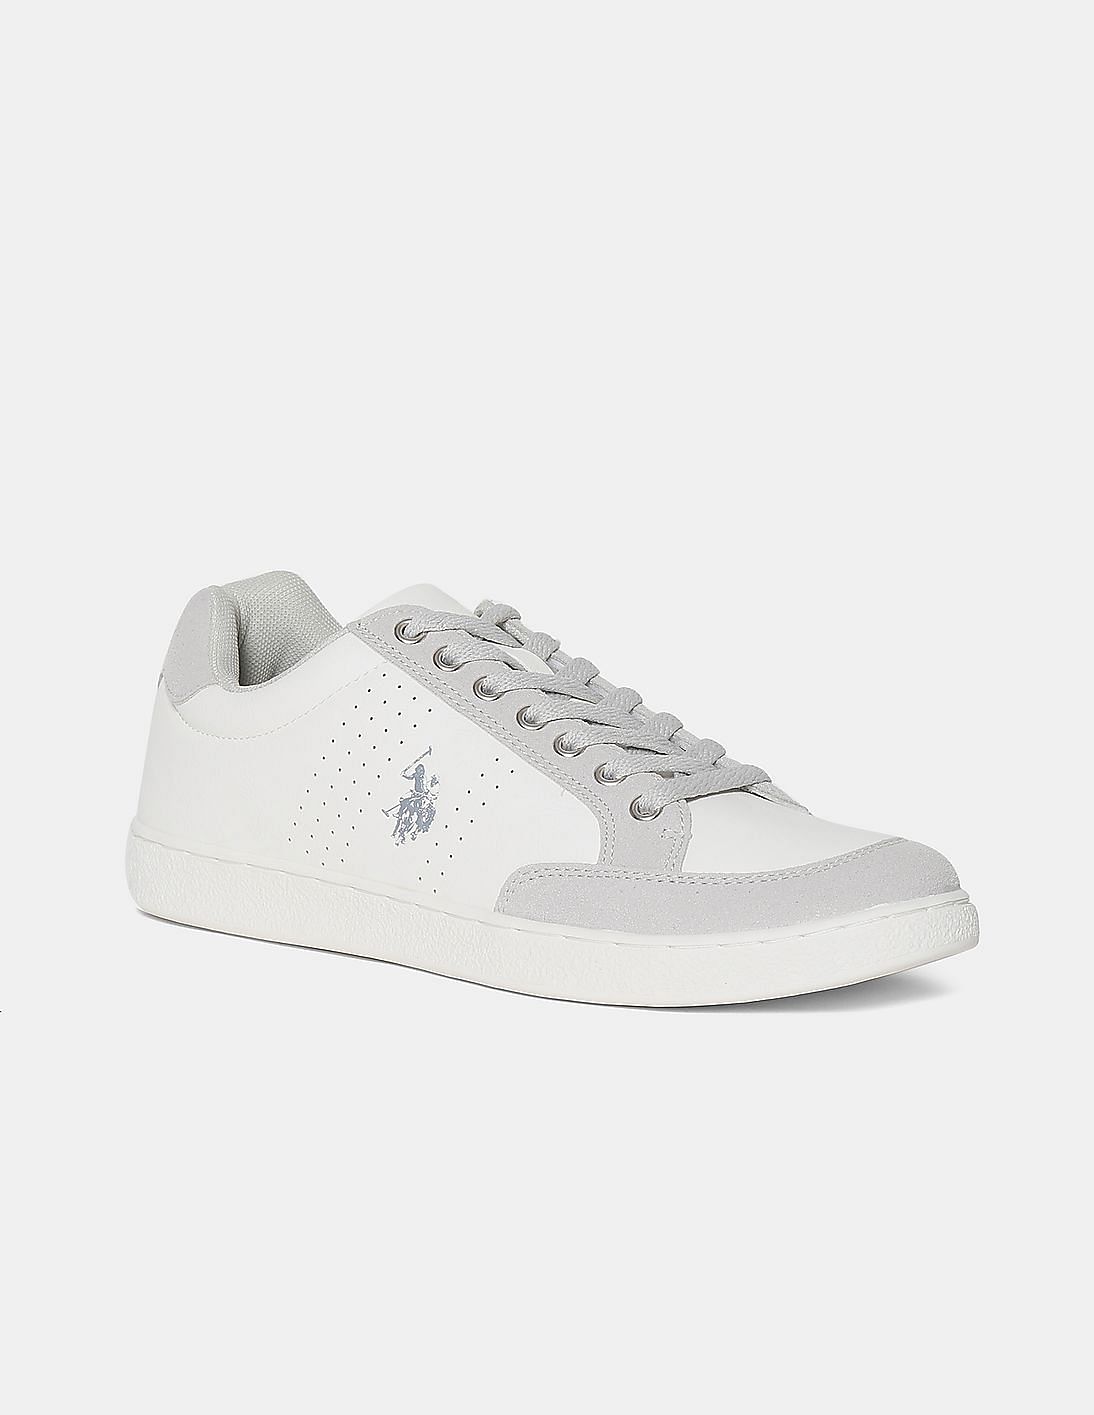 Buy U.S. Polo Assn. Men Men White Suedette Panel Perforated Lace Up ...